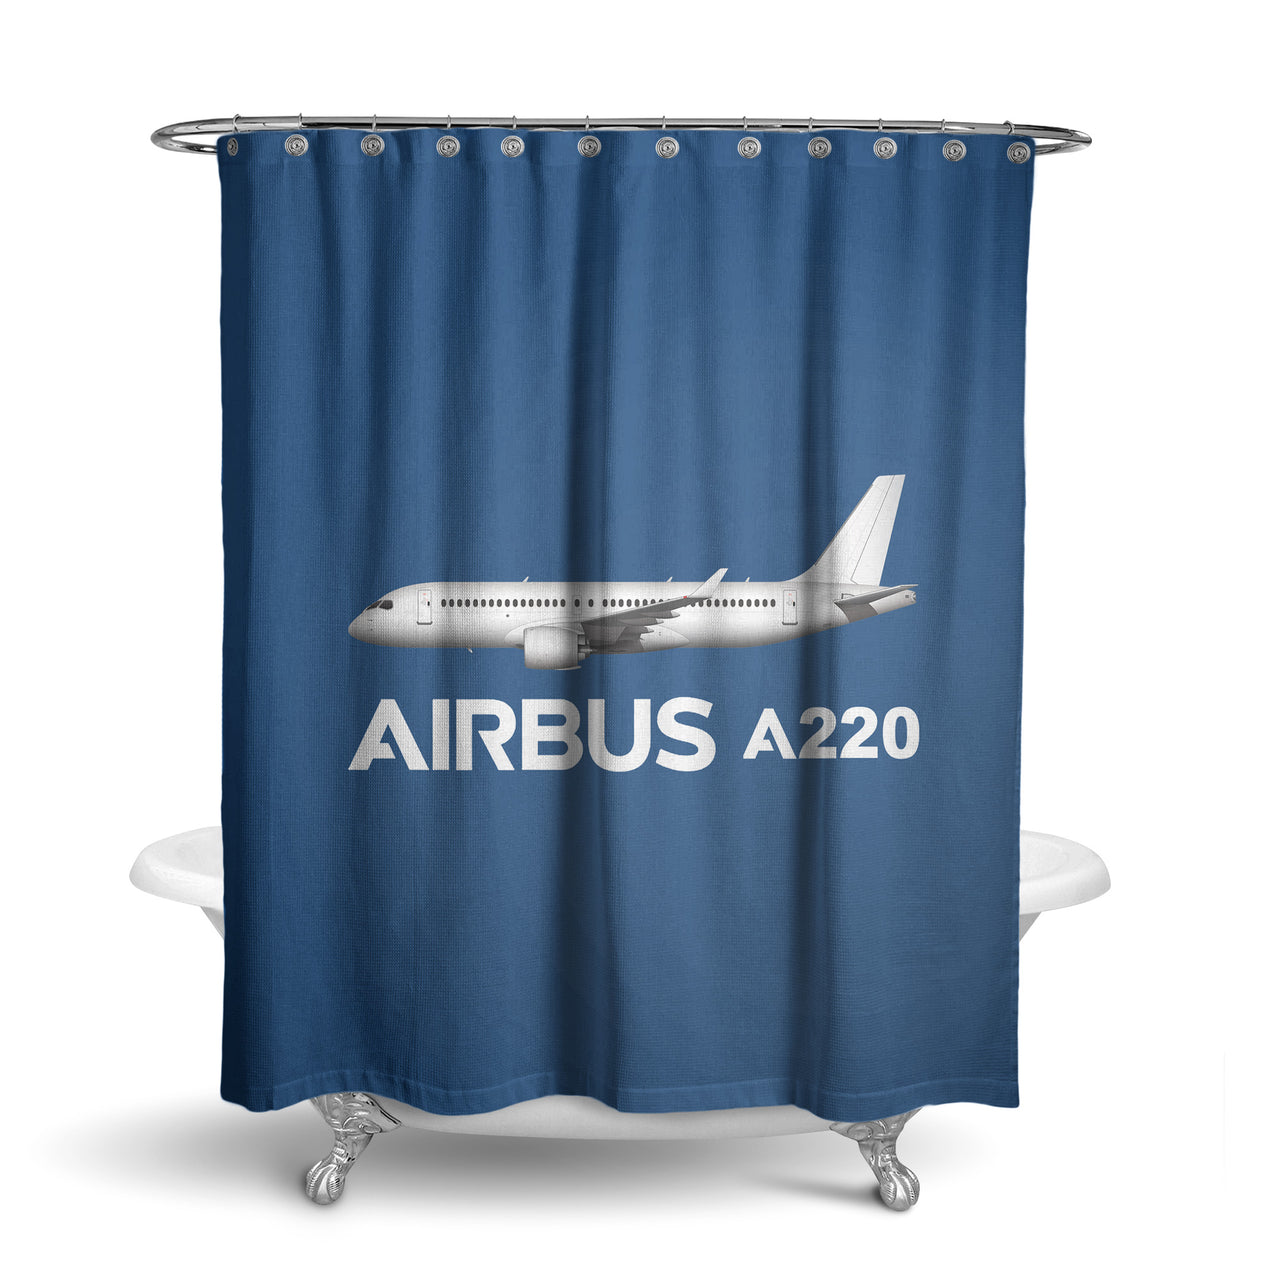 The Airbus A220 Designed Shower Curtains